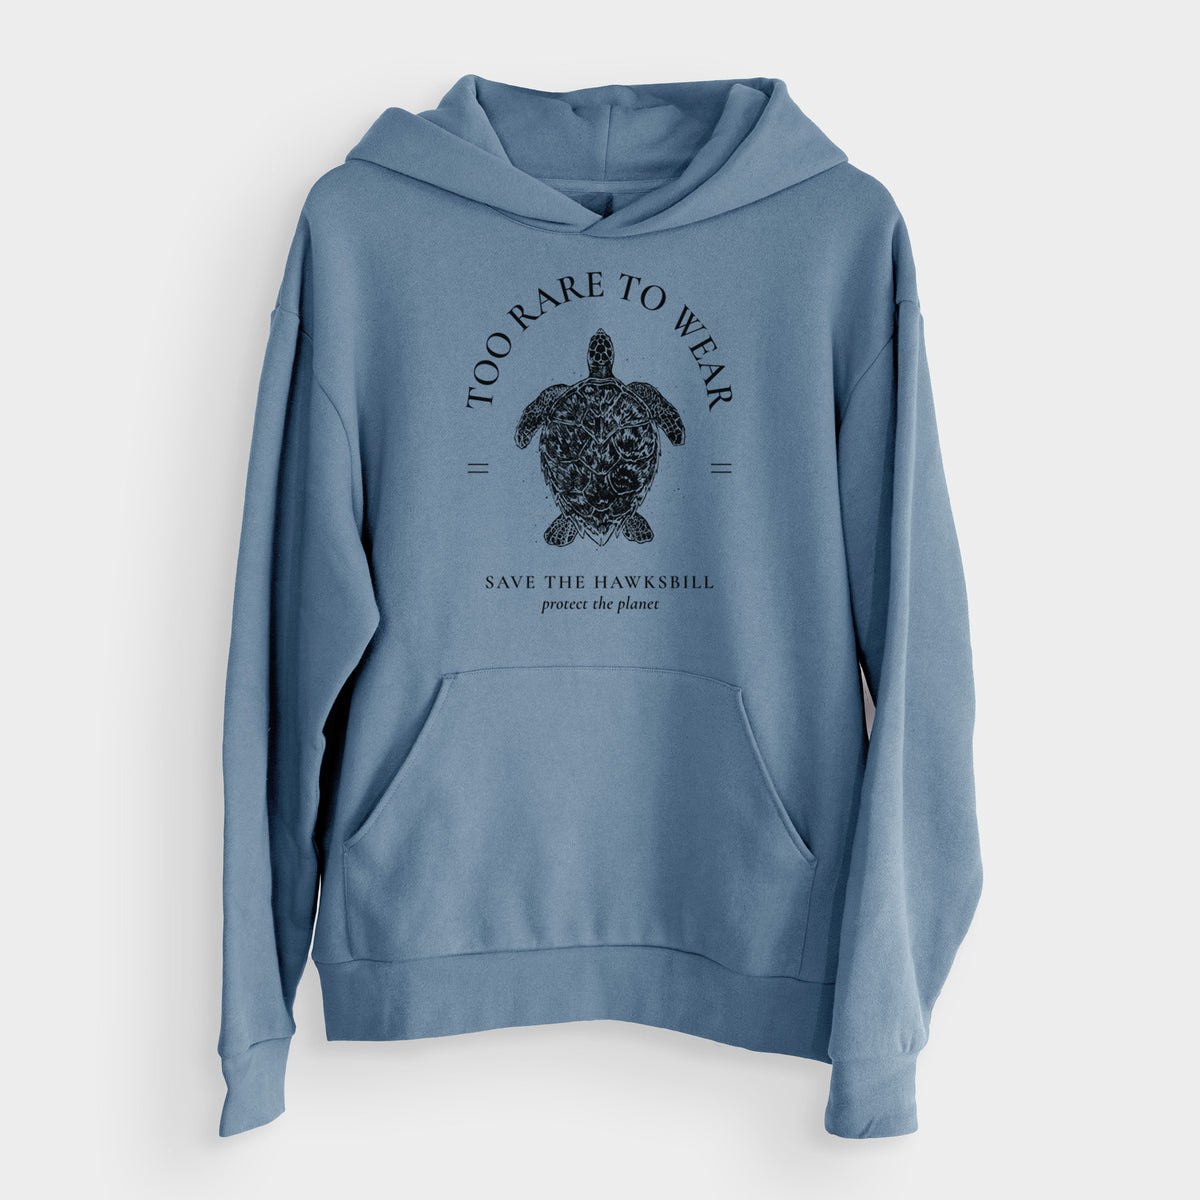 Too Rare to Wear - Save the Hawksbill  - Bodega Midweight Hoodie